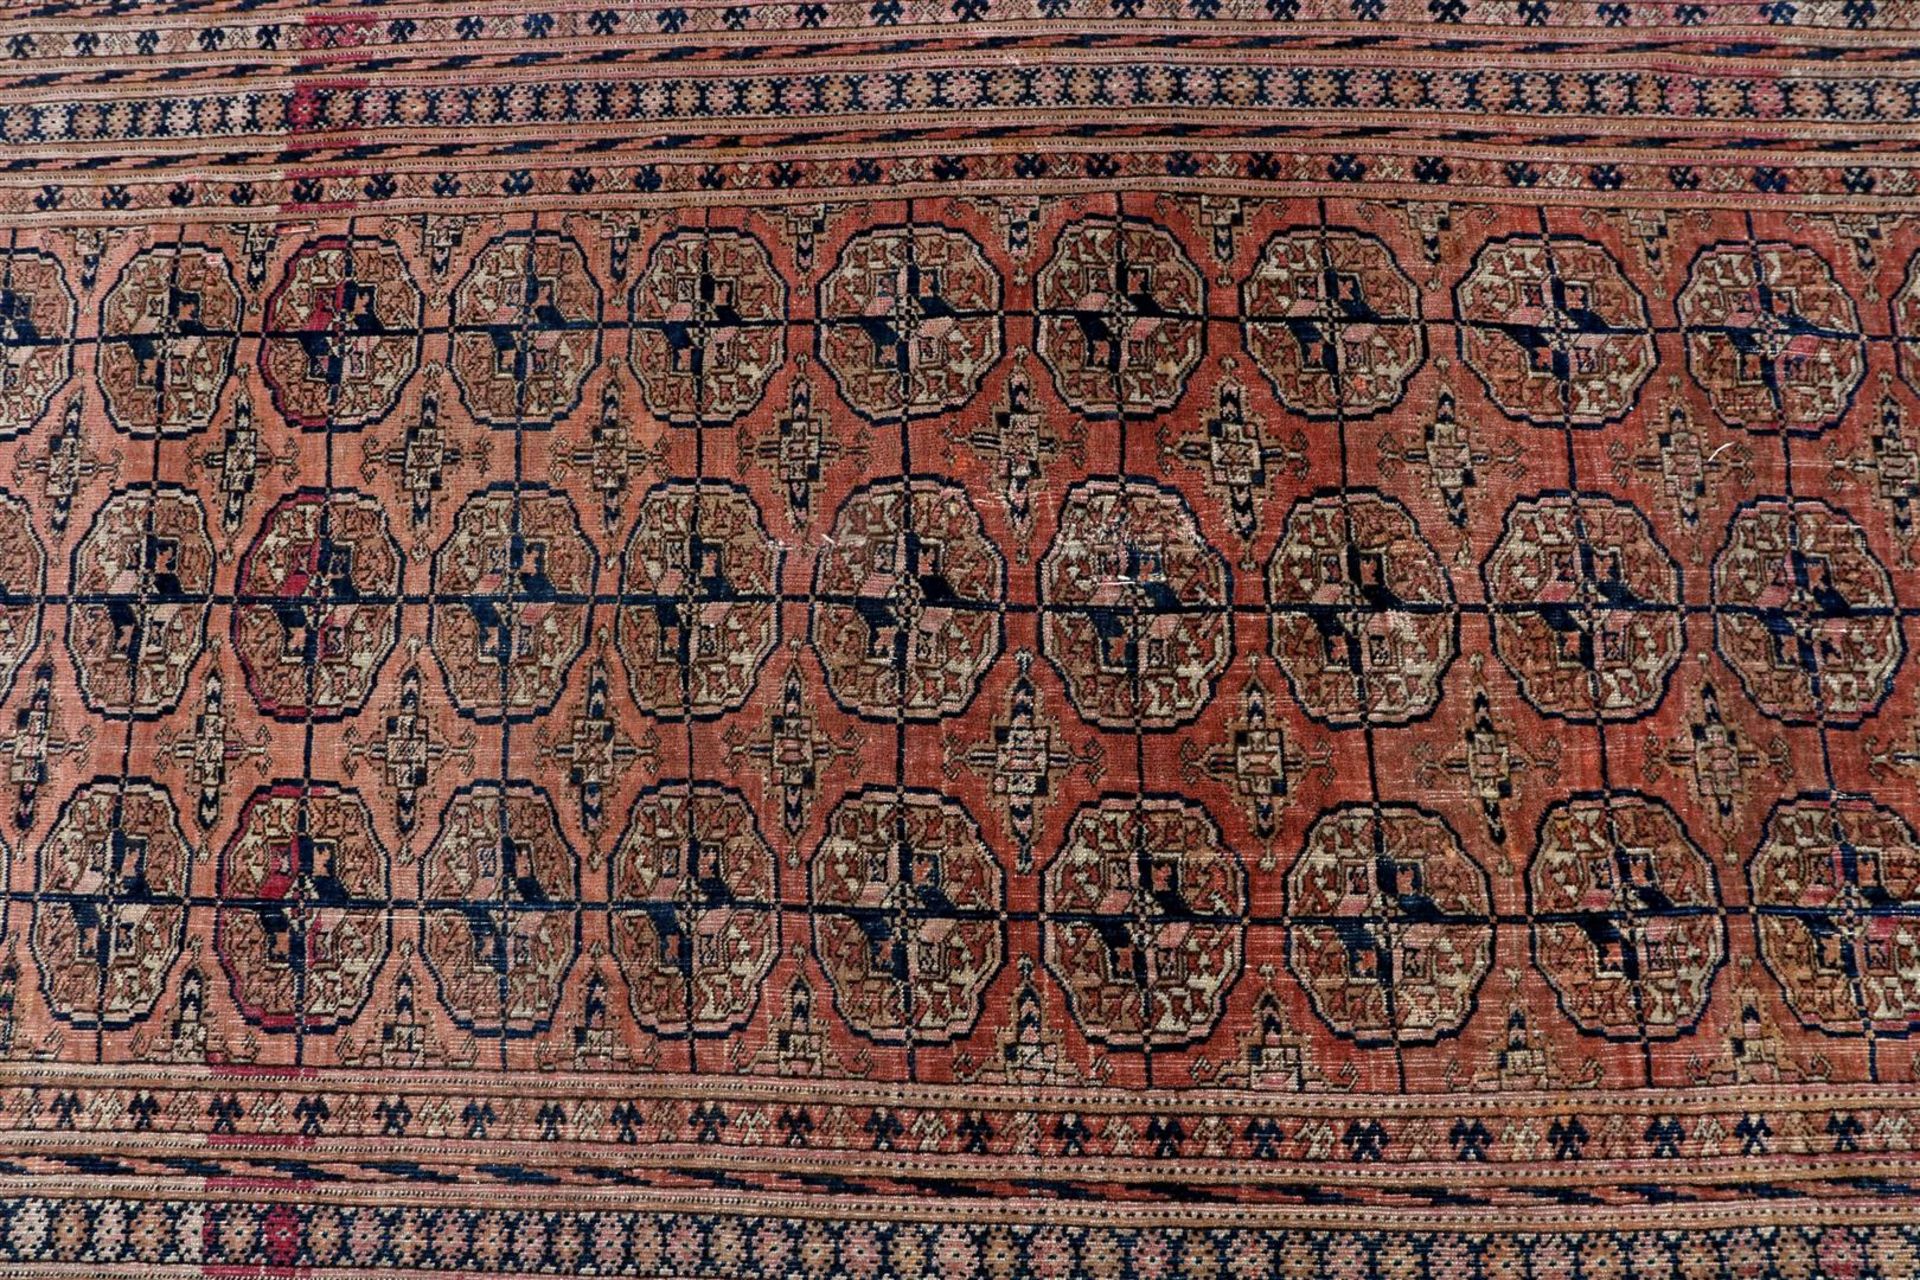 Bochara hand-knotted carpet - Image 3 of 3